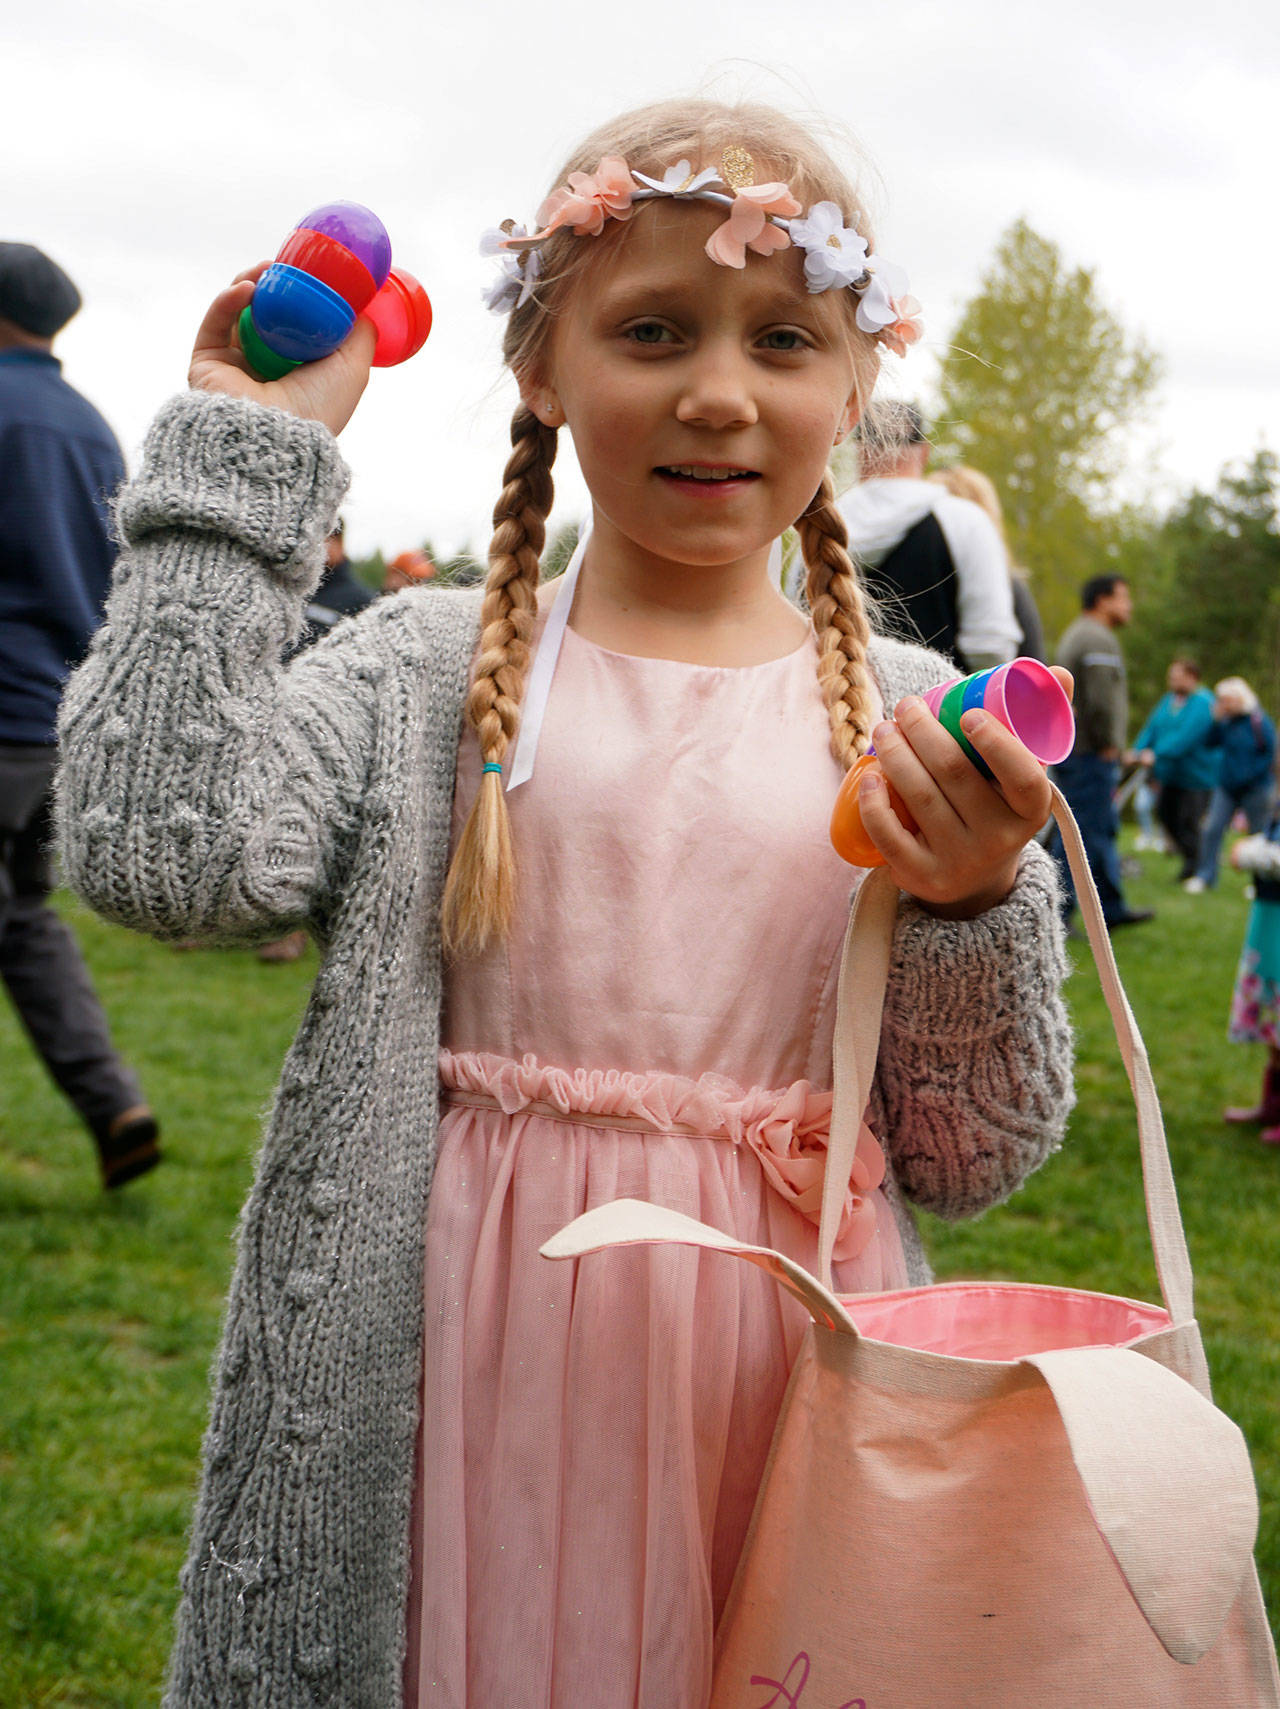 Alison Otto, 8, filled her basket at the Fathoms O’ Fun Easter Egg Hunt April 20 at South Kitsap Regional Park. (Bob Smith | Kitsap Daily News)